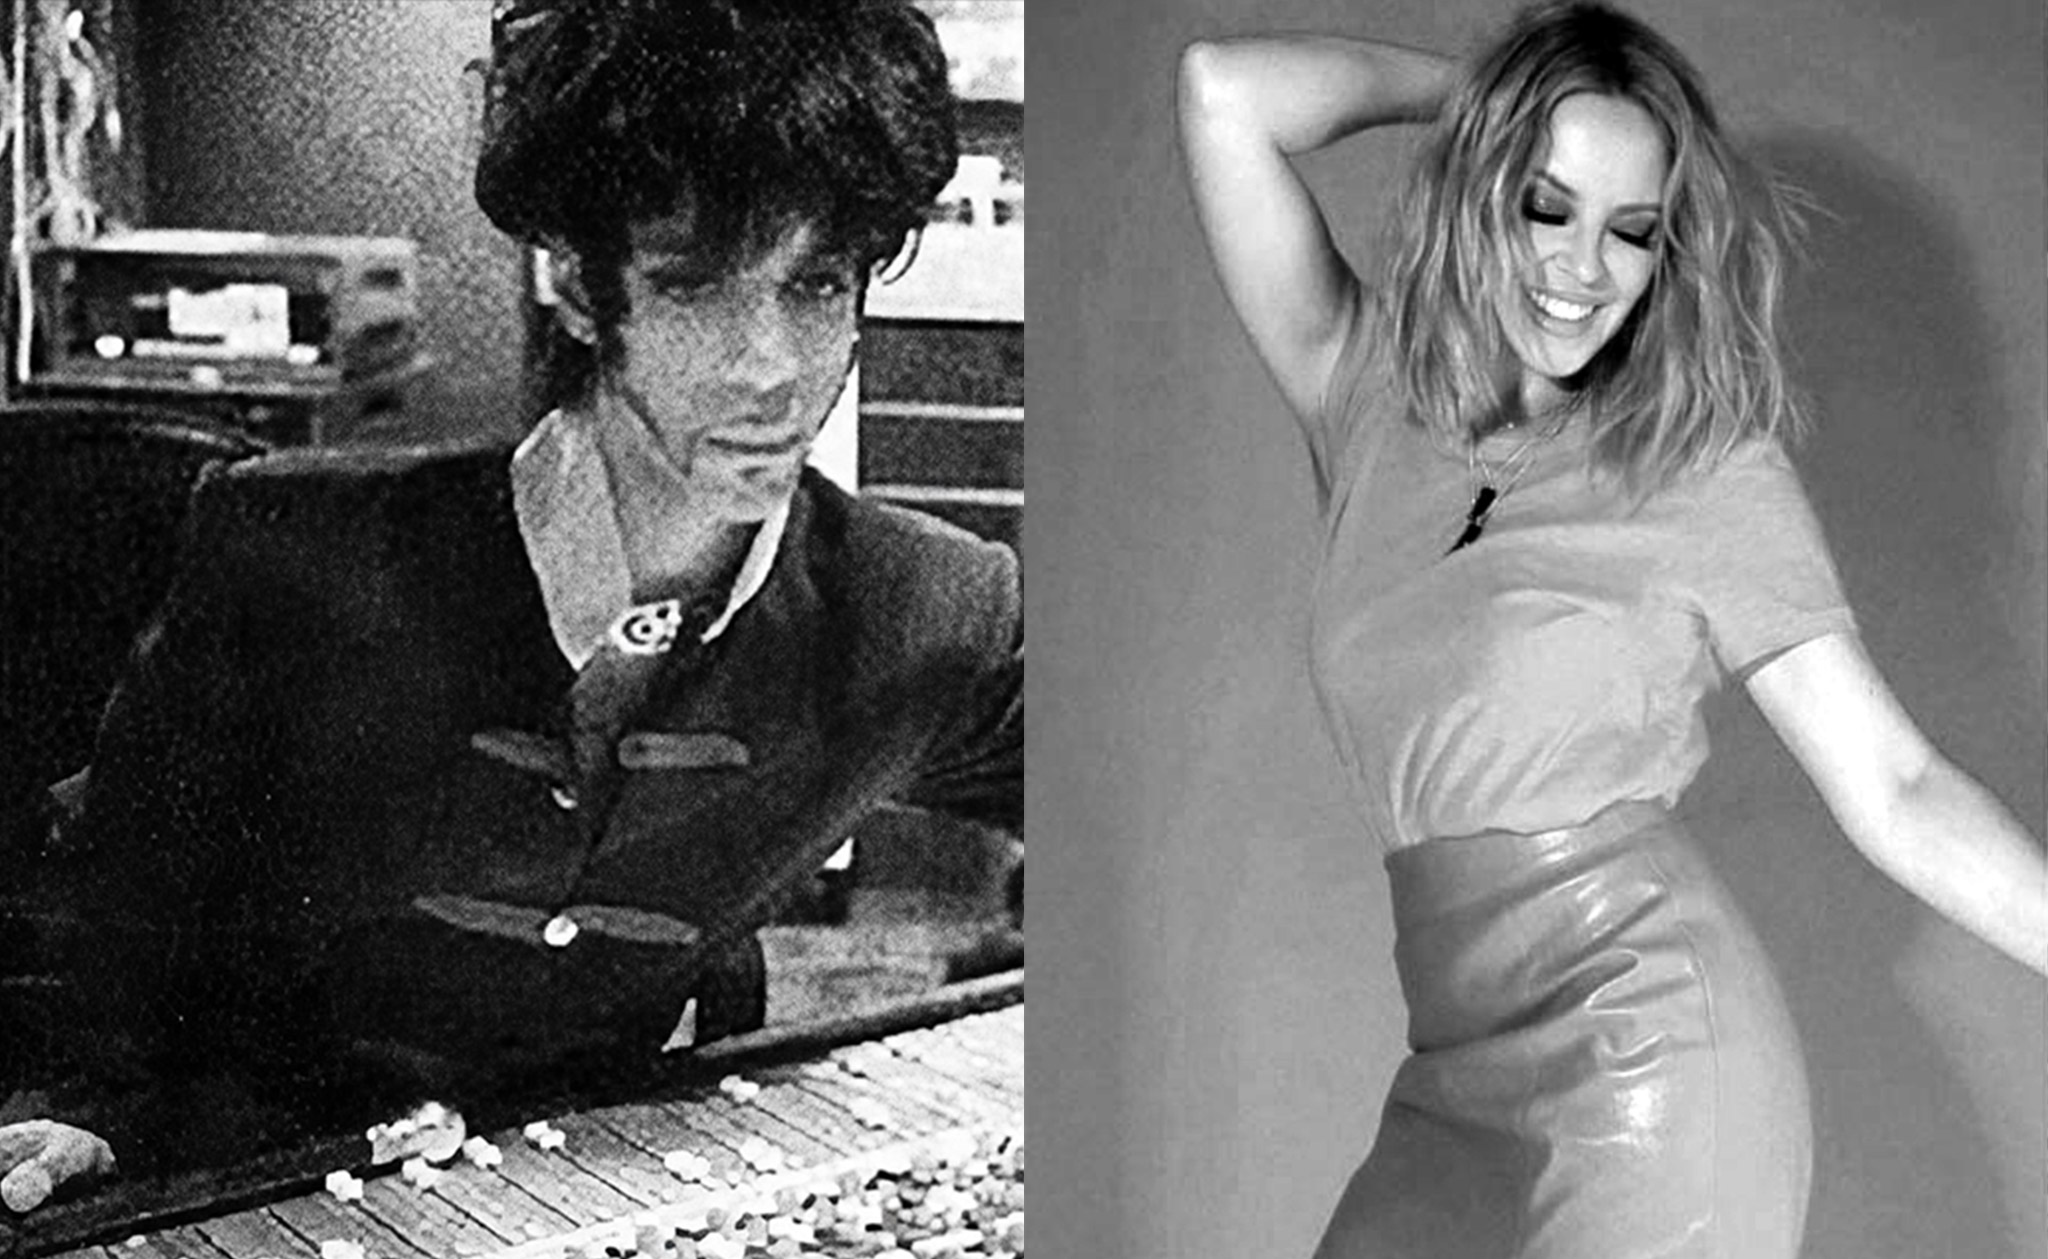 The unreleased Prince song & near collaboration with Kylie Minogue ...